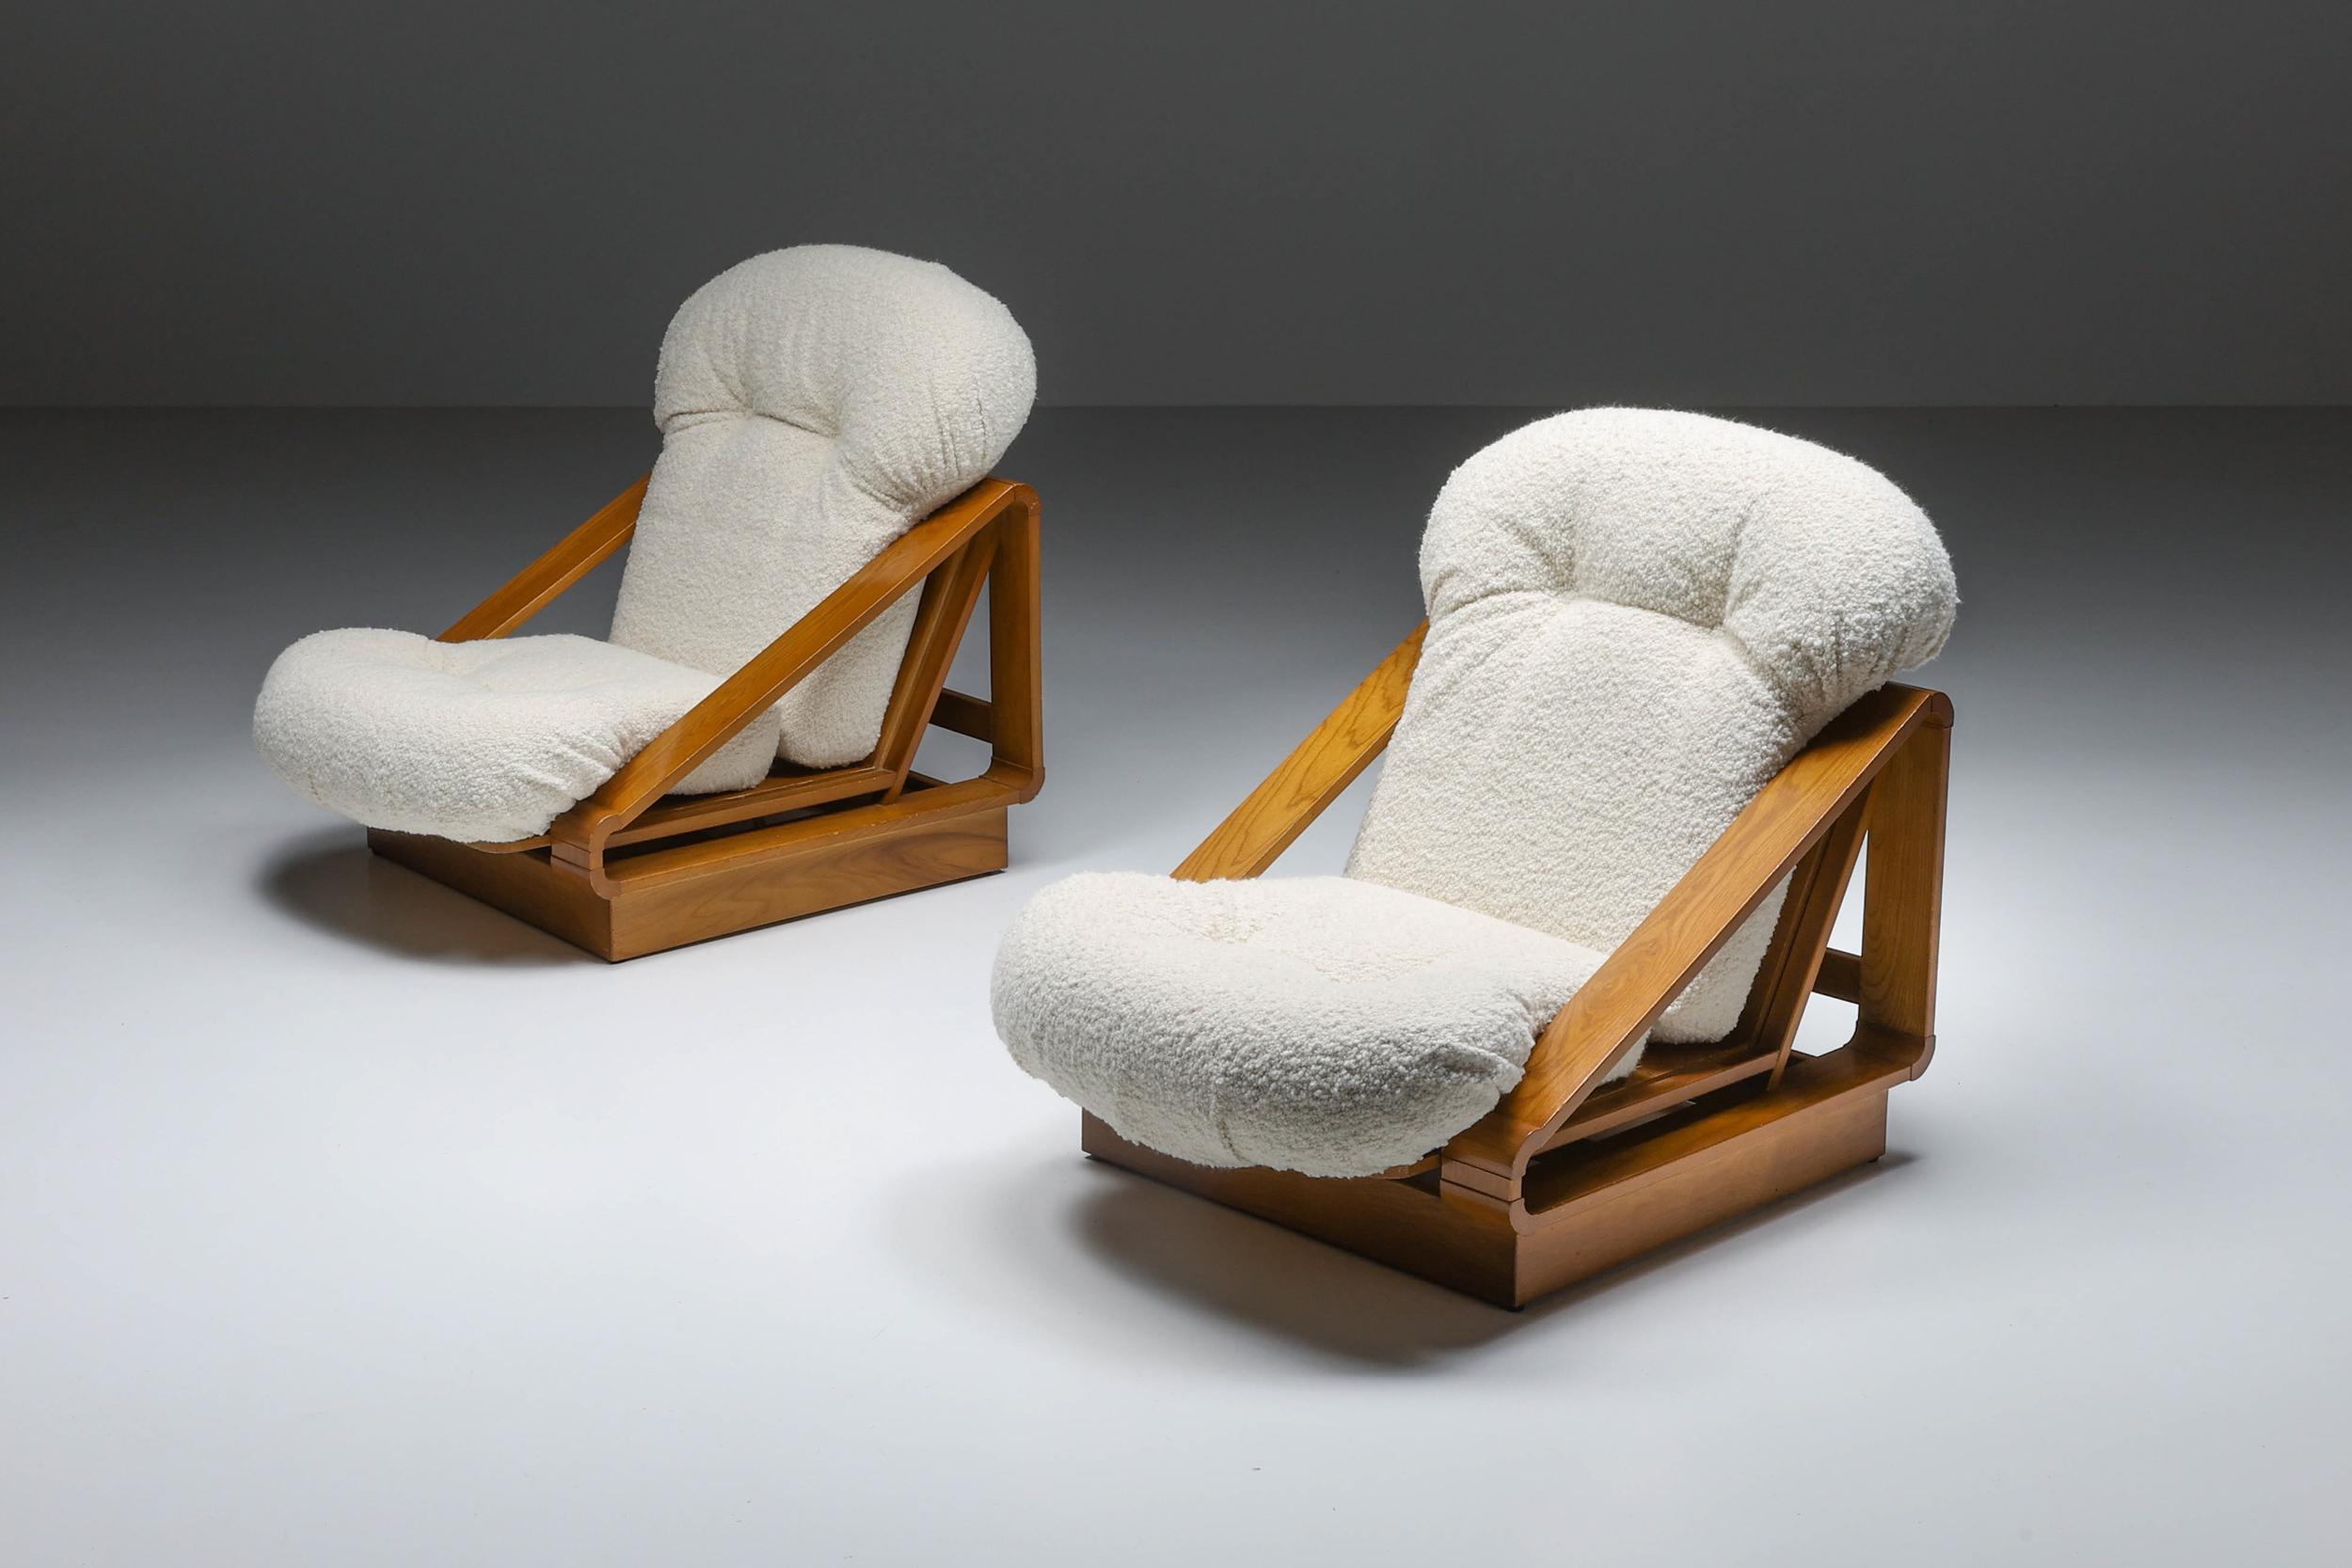 Mid-Century Modern Italian Design; Italian lounge chairs; Renato Toso & Roberto Patio for Stilwood; 1960's

Architectural set of boucle lounge chairs designed by Renato Toso & Roberto Patio for Stilwood. Beautifully upholstered in boucle wool. A